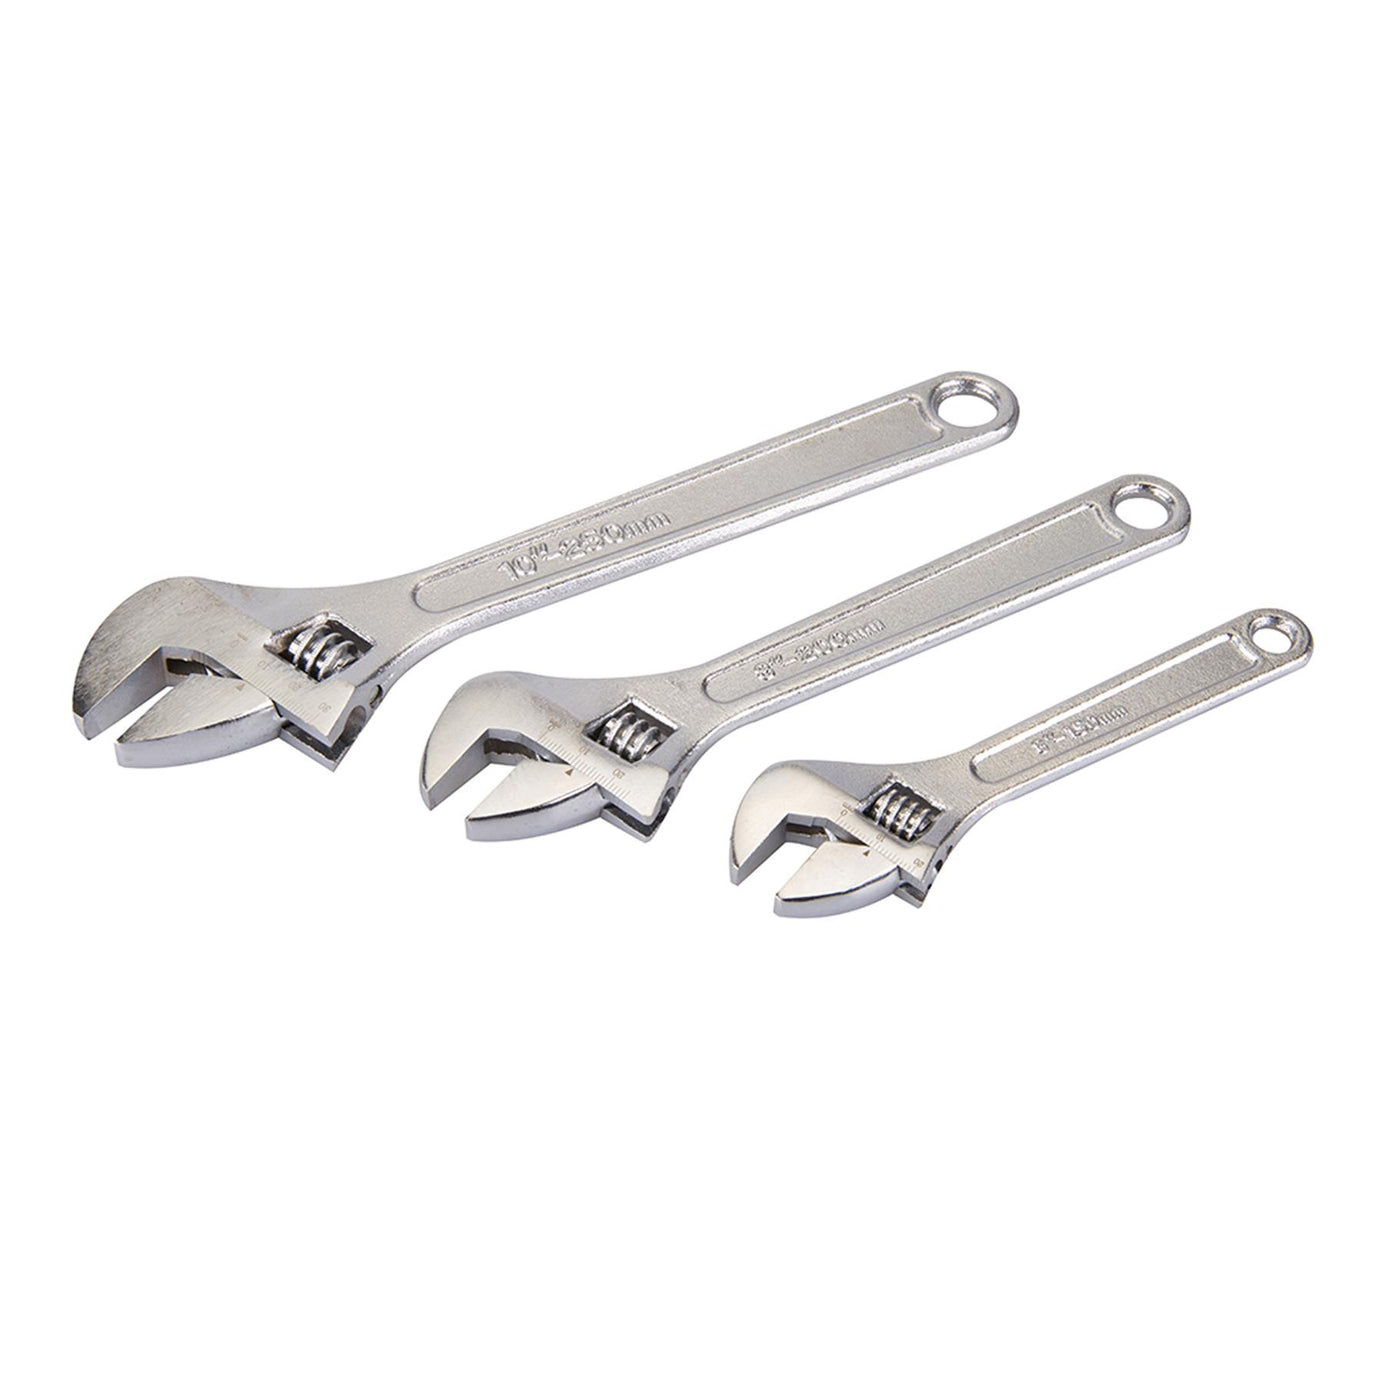 3Pce Adjustable Wrench Set 150, 200 & 250mm Chrome-Plated Carbon Steel